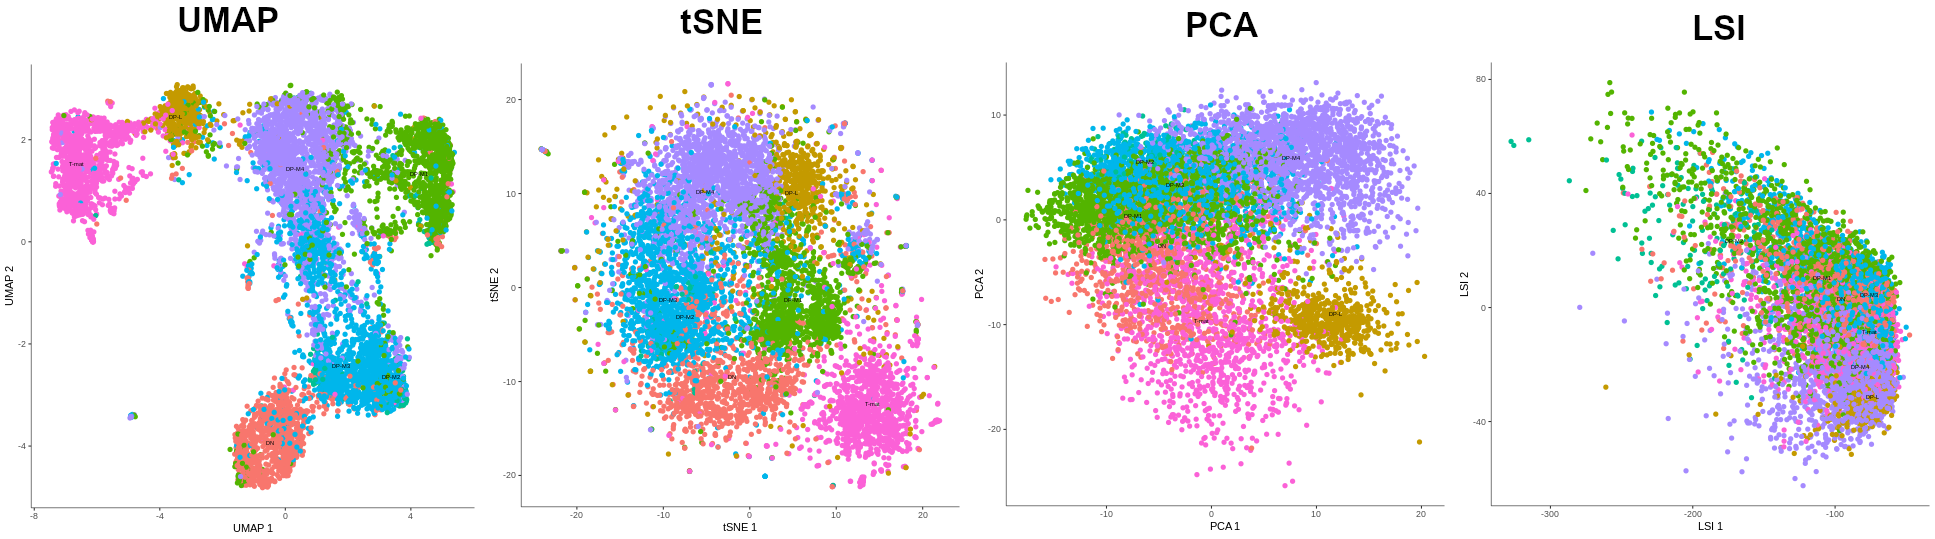 Four graphs showing the alignment of cell types depending on the algorithm of dimensionality reduction that was chosen: UMAP, tSNE, PCA, LSI. UMAP shows distinct cell groups, transitioning smoothly from one to another, creating kind of semicircle. tSNE shows distinct cell groups, however no smooth transitions are observed, all groups gathered into one big grouping. PCA shows cell groups whose boundaries are blurred between each other. On LSI graph, the cell types are all mixed together.